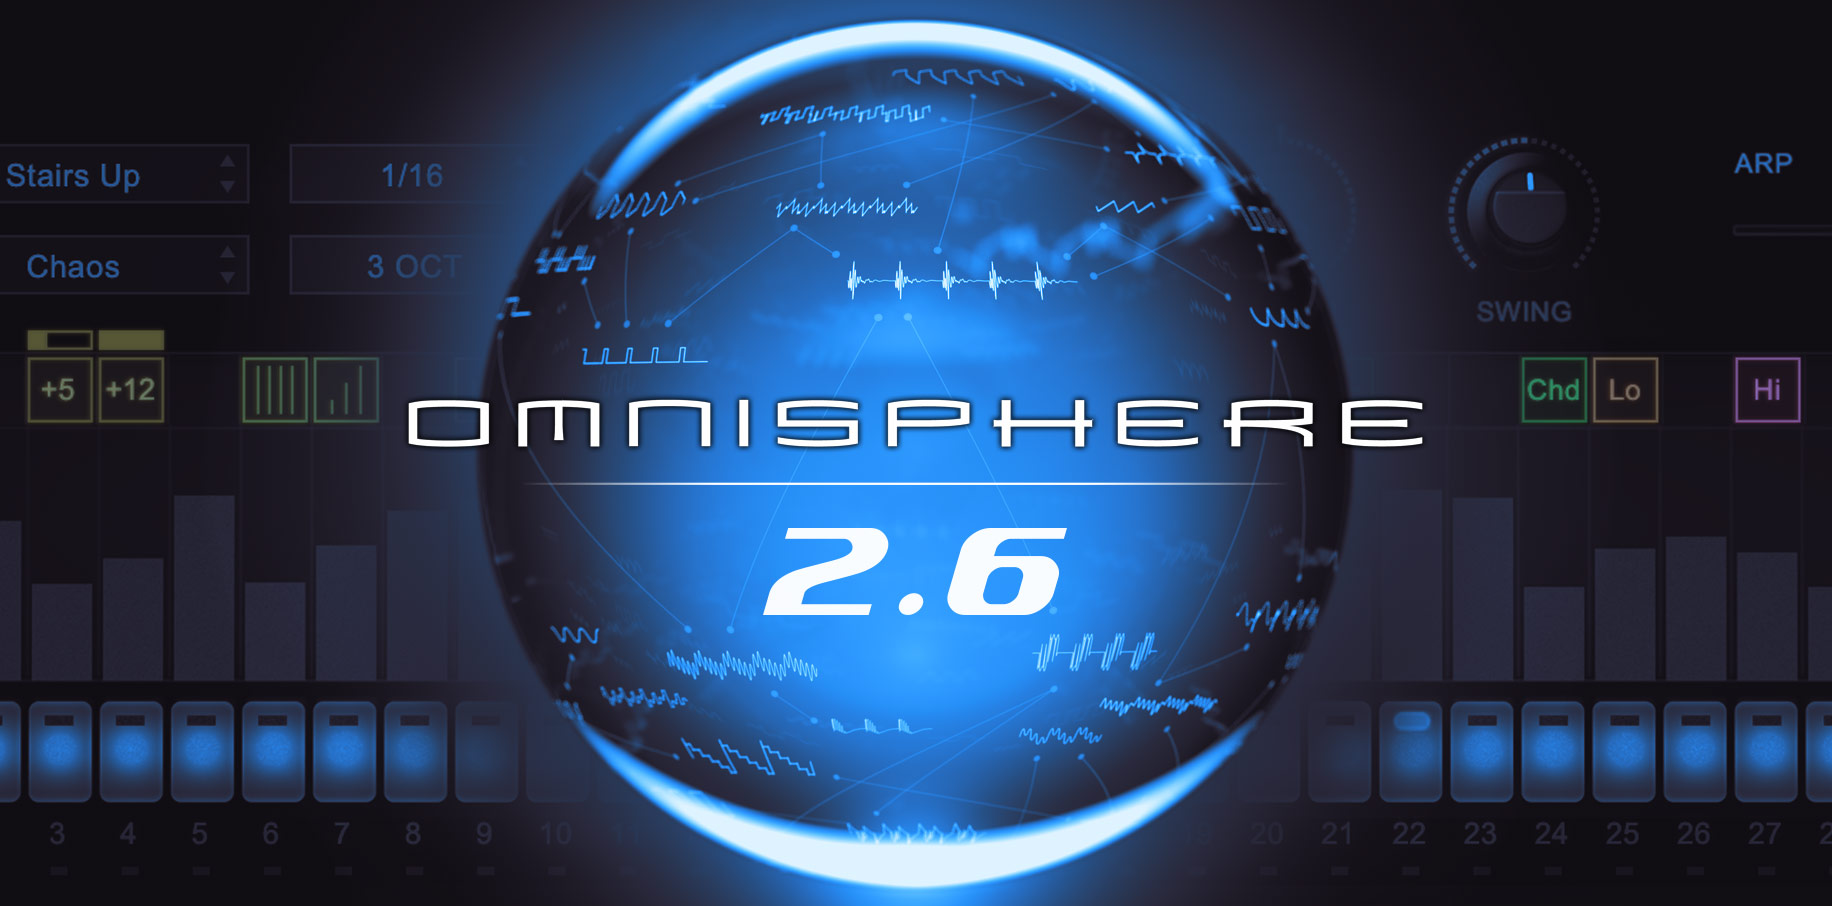 omnisphere r2r keygen connection to this was lost